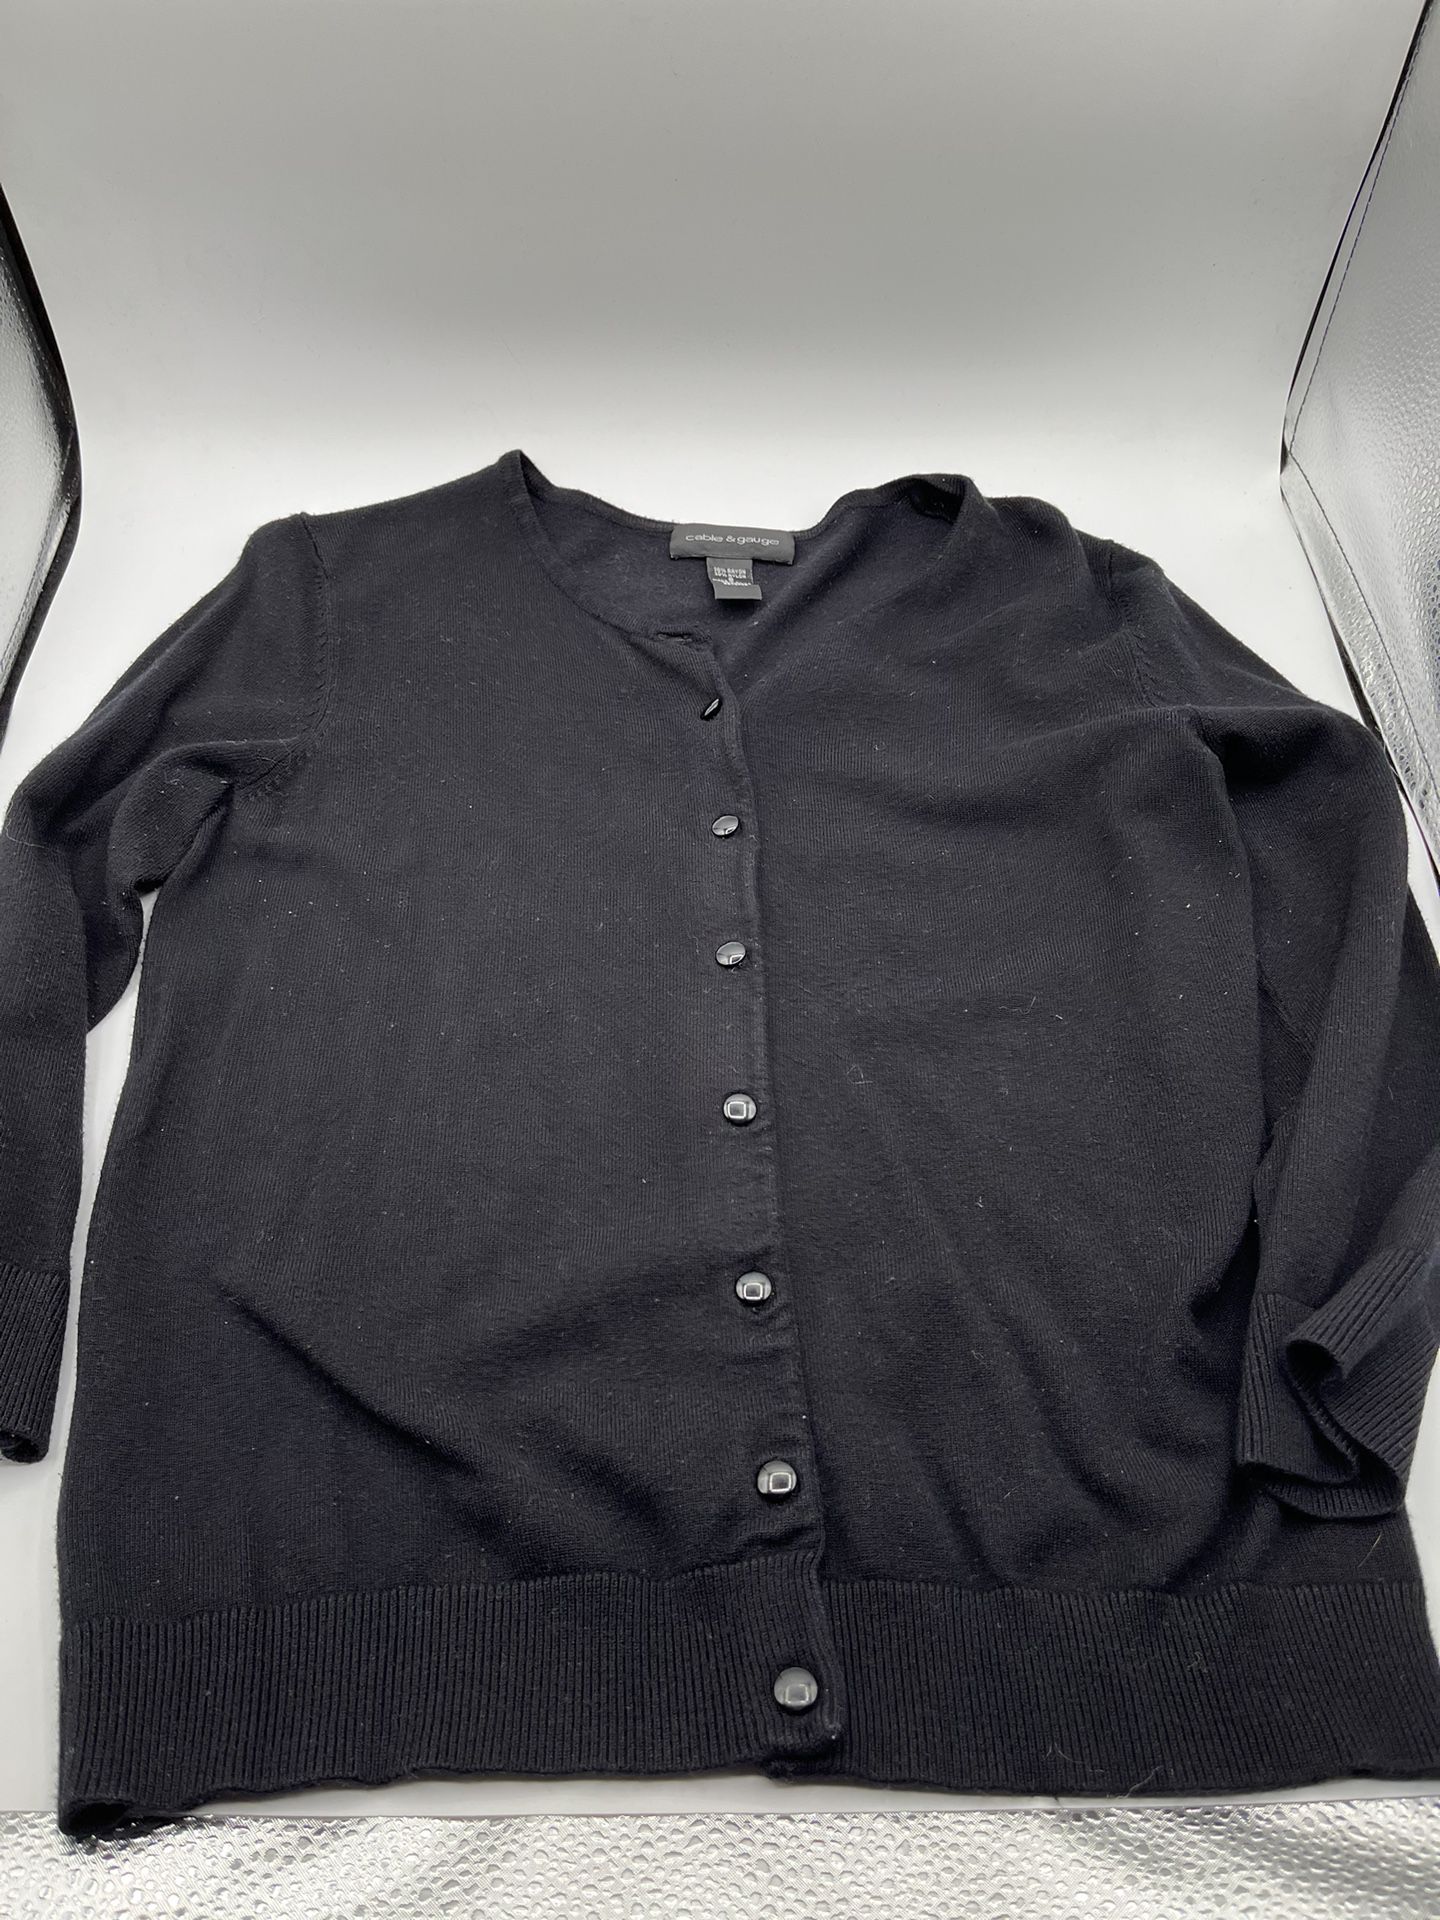 Cable & Gauge Women’s Black Cardigan Size Small